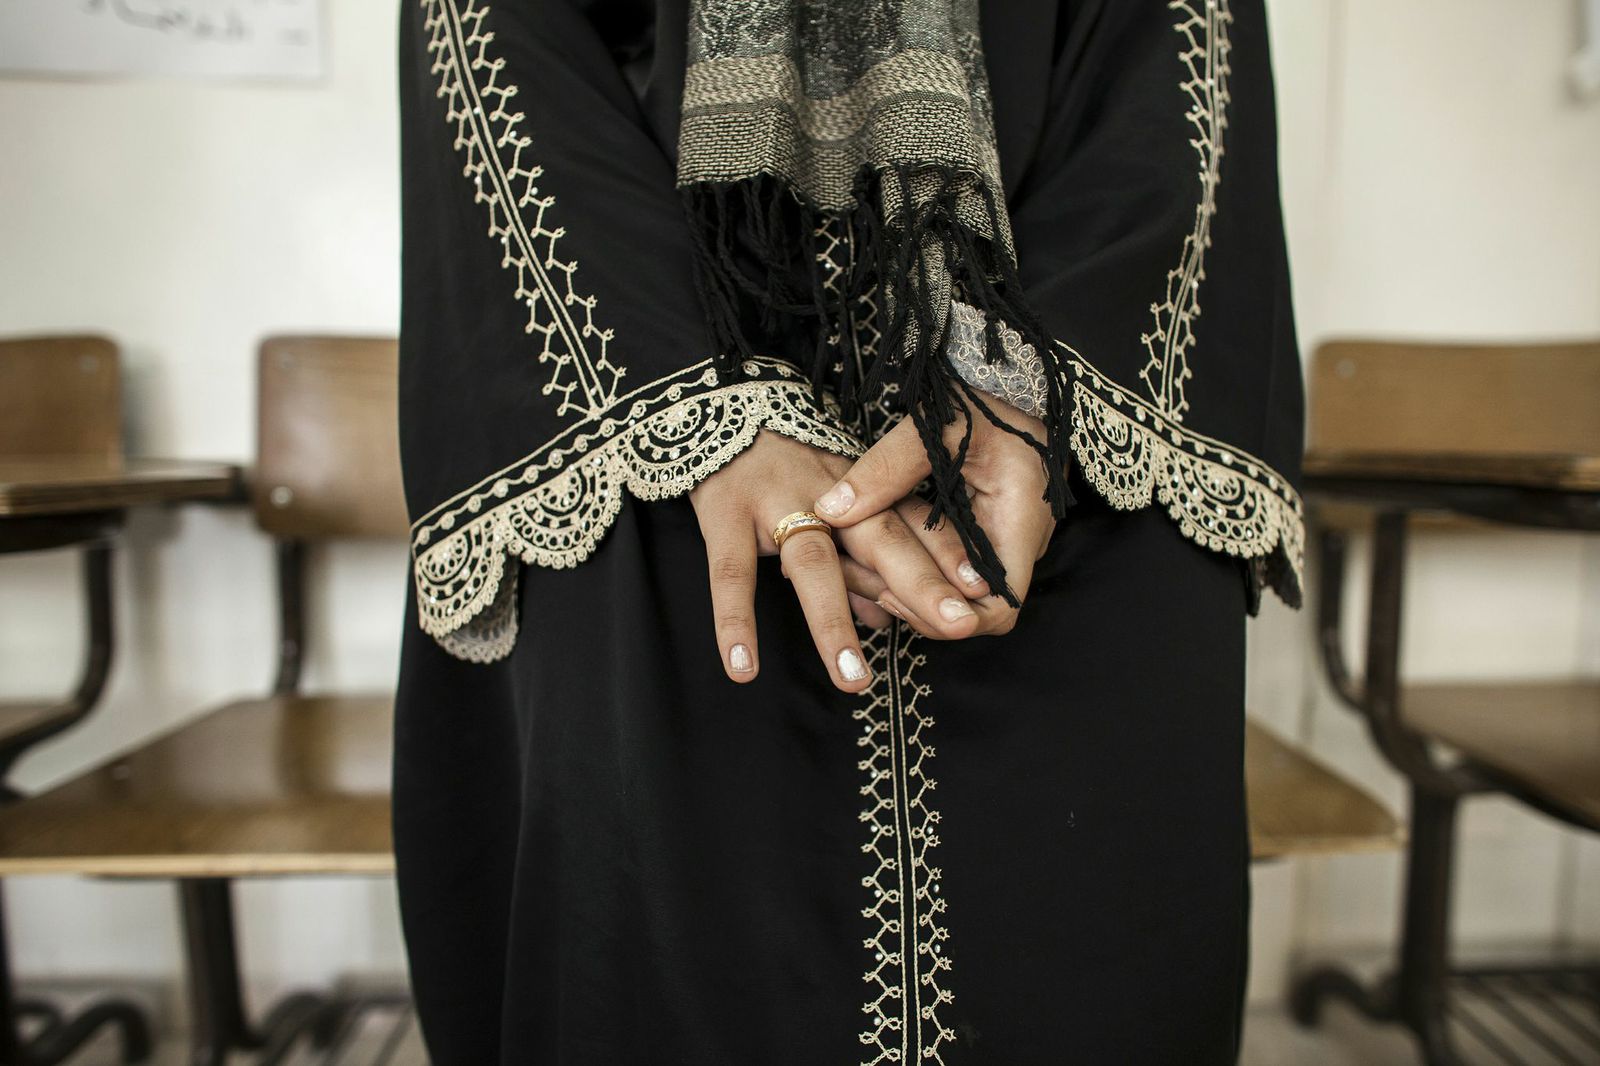 A Jordanian student shows off her engagement ring at the Social Support Center, an NGO which provides classes for dropout students, in Amman May 2012.